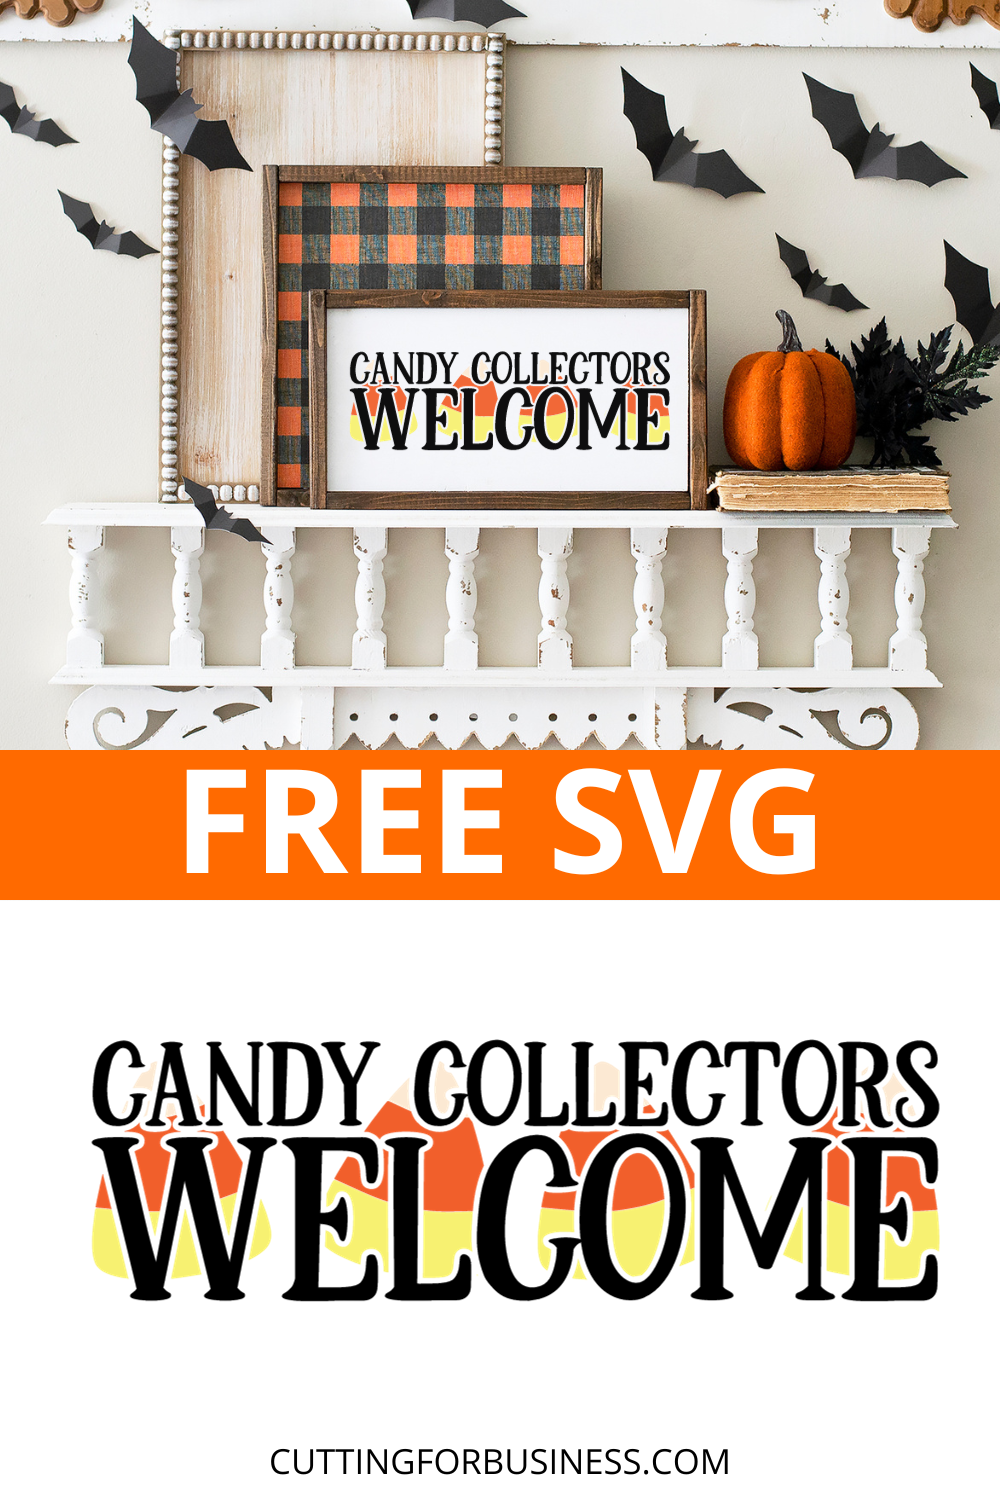 Free Candy Collectors Welcome SVG - cuttingforbusiness.com